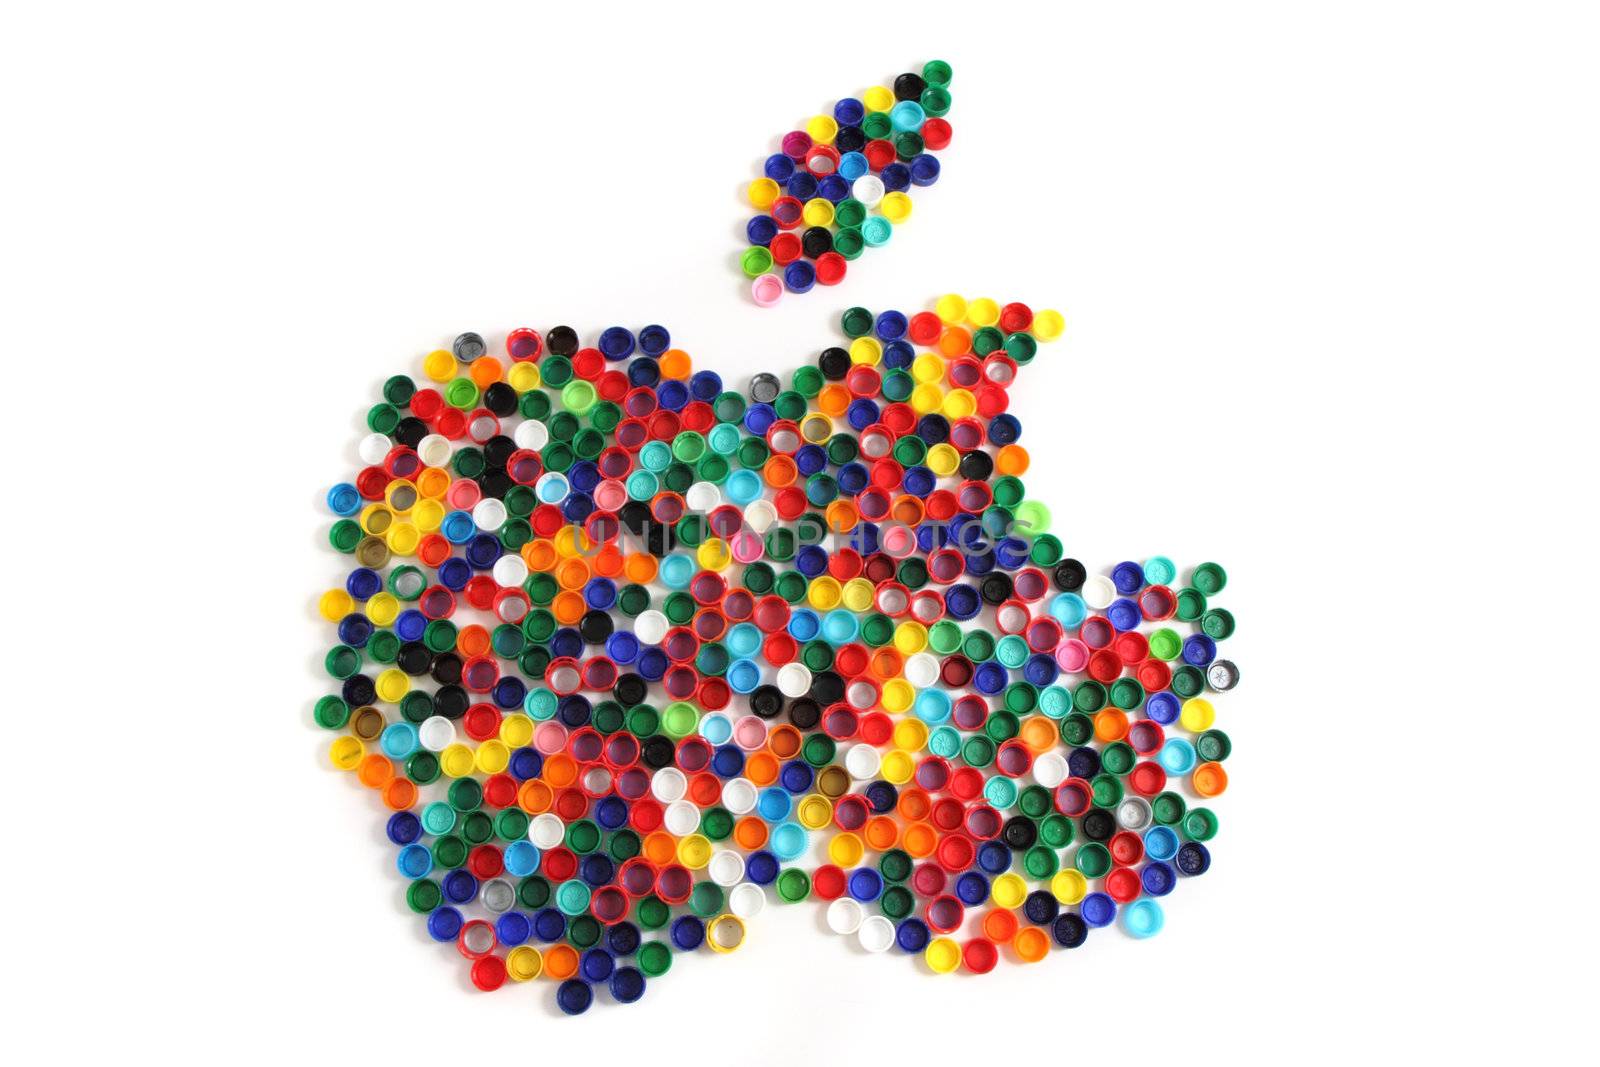 apple from the color plastic caps by jonnysek